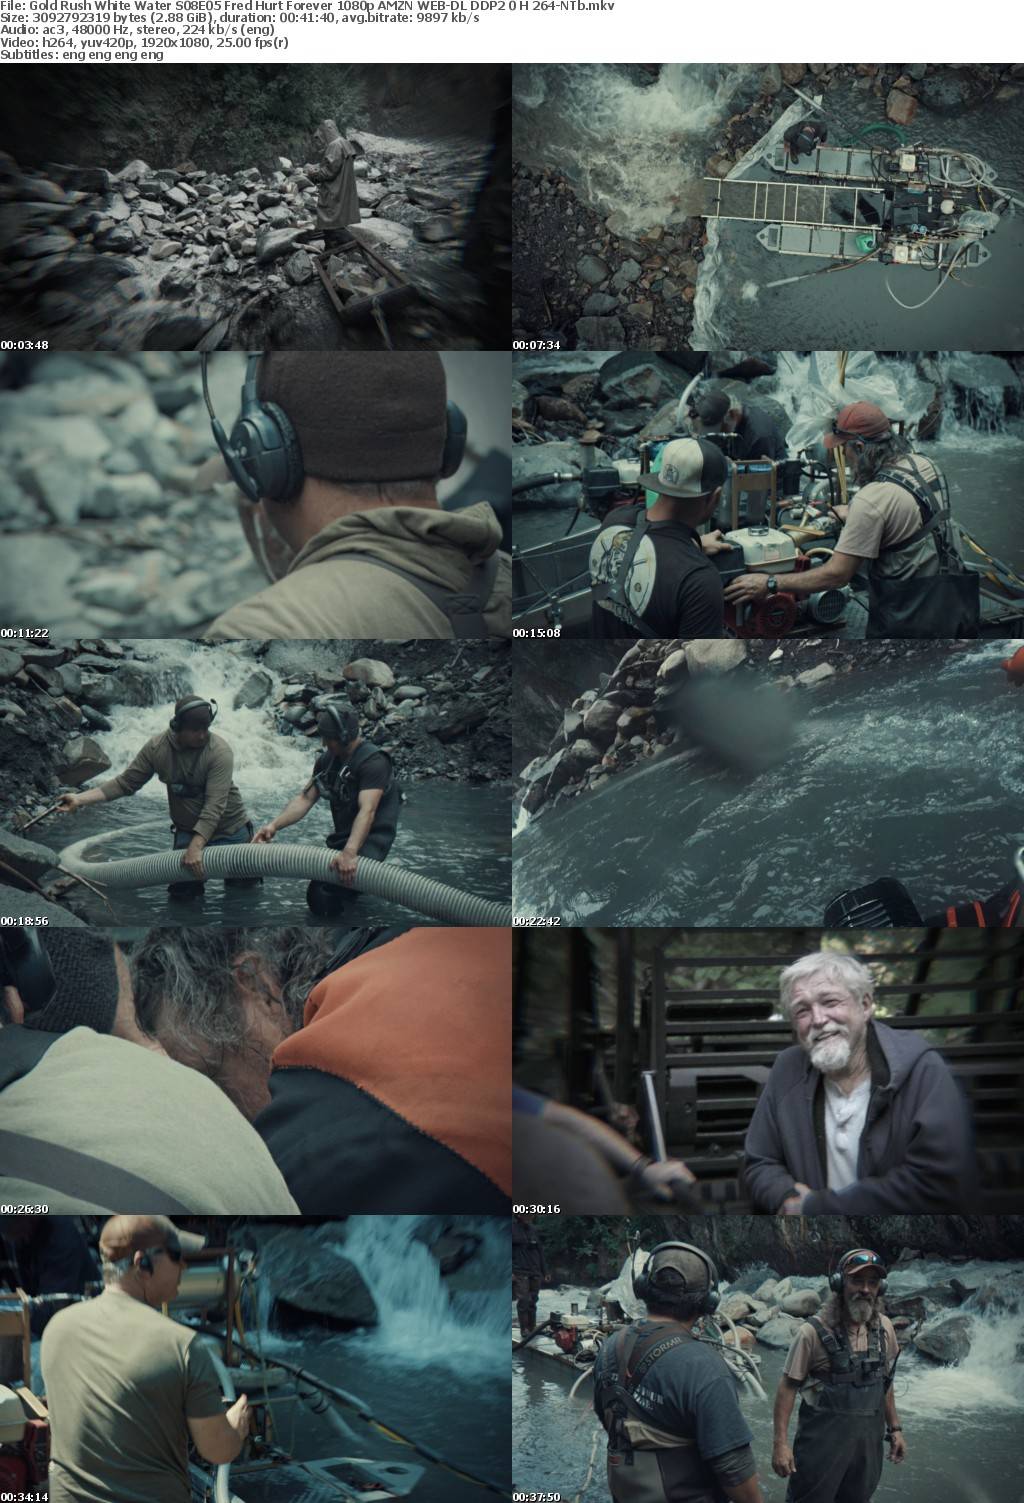 Gold Rush White Water S08E05 Fred Hurt Forever 1080p AMZN WEB-DL DDP2 0 H 264-NTb